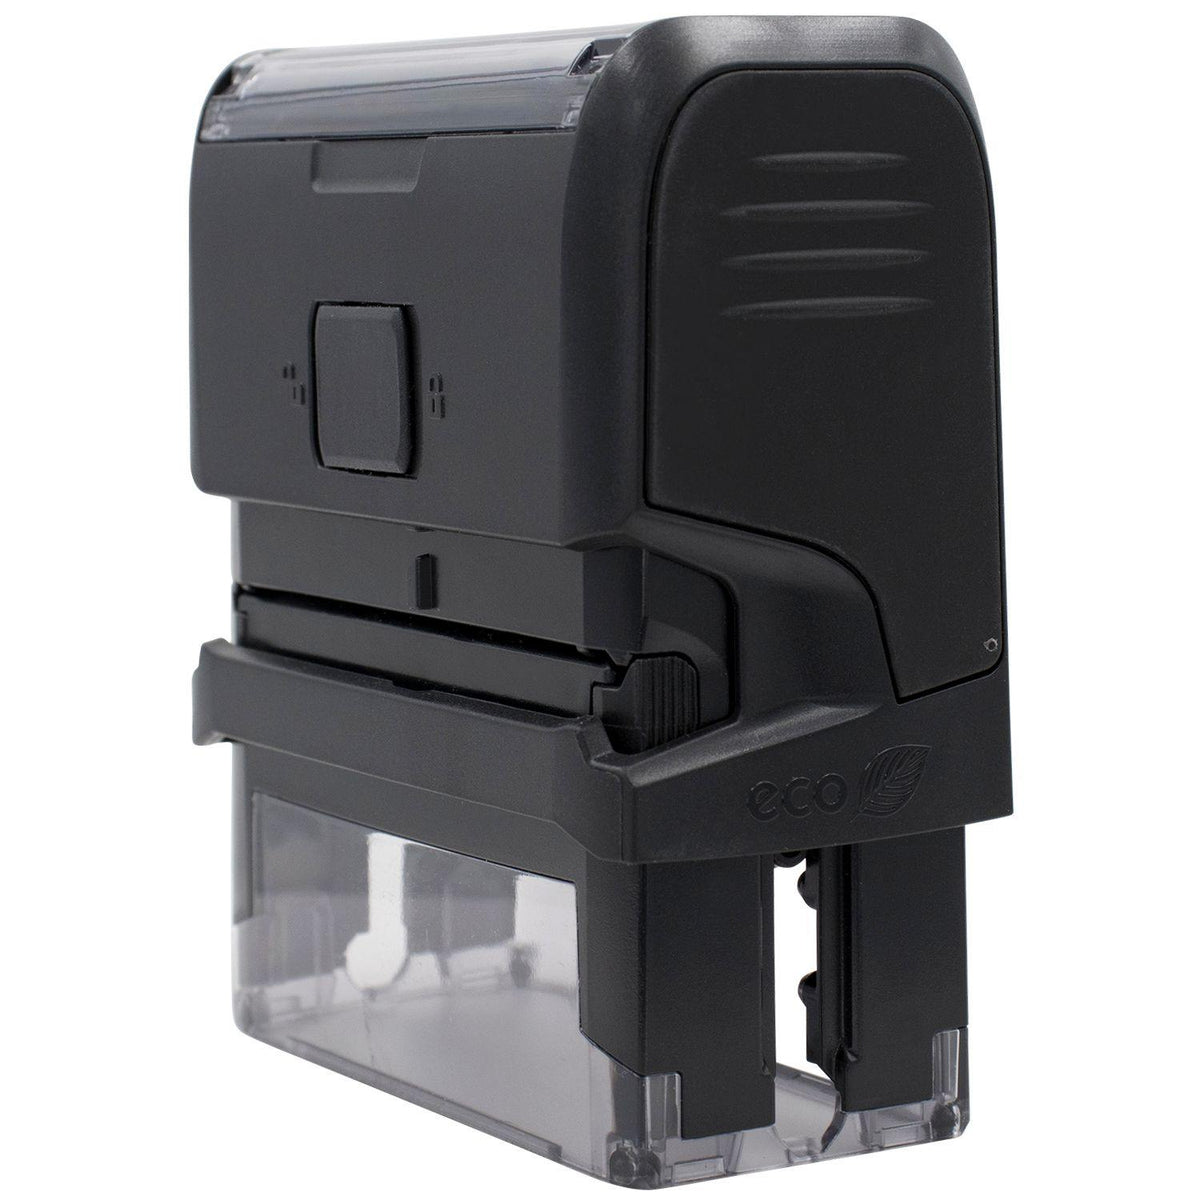 Side View of Large Self-Inking Bold Distributed Stamp at an Angle